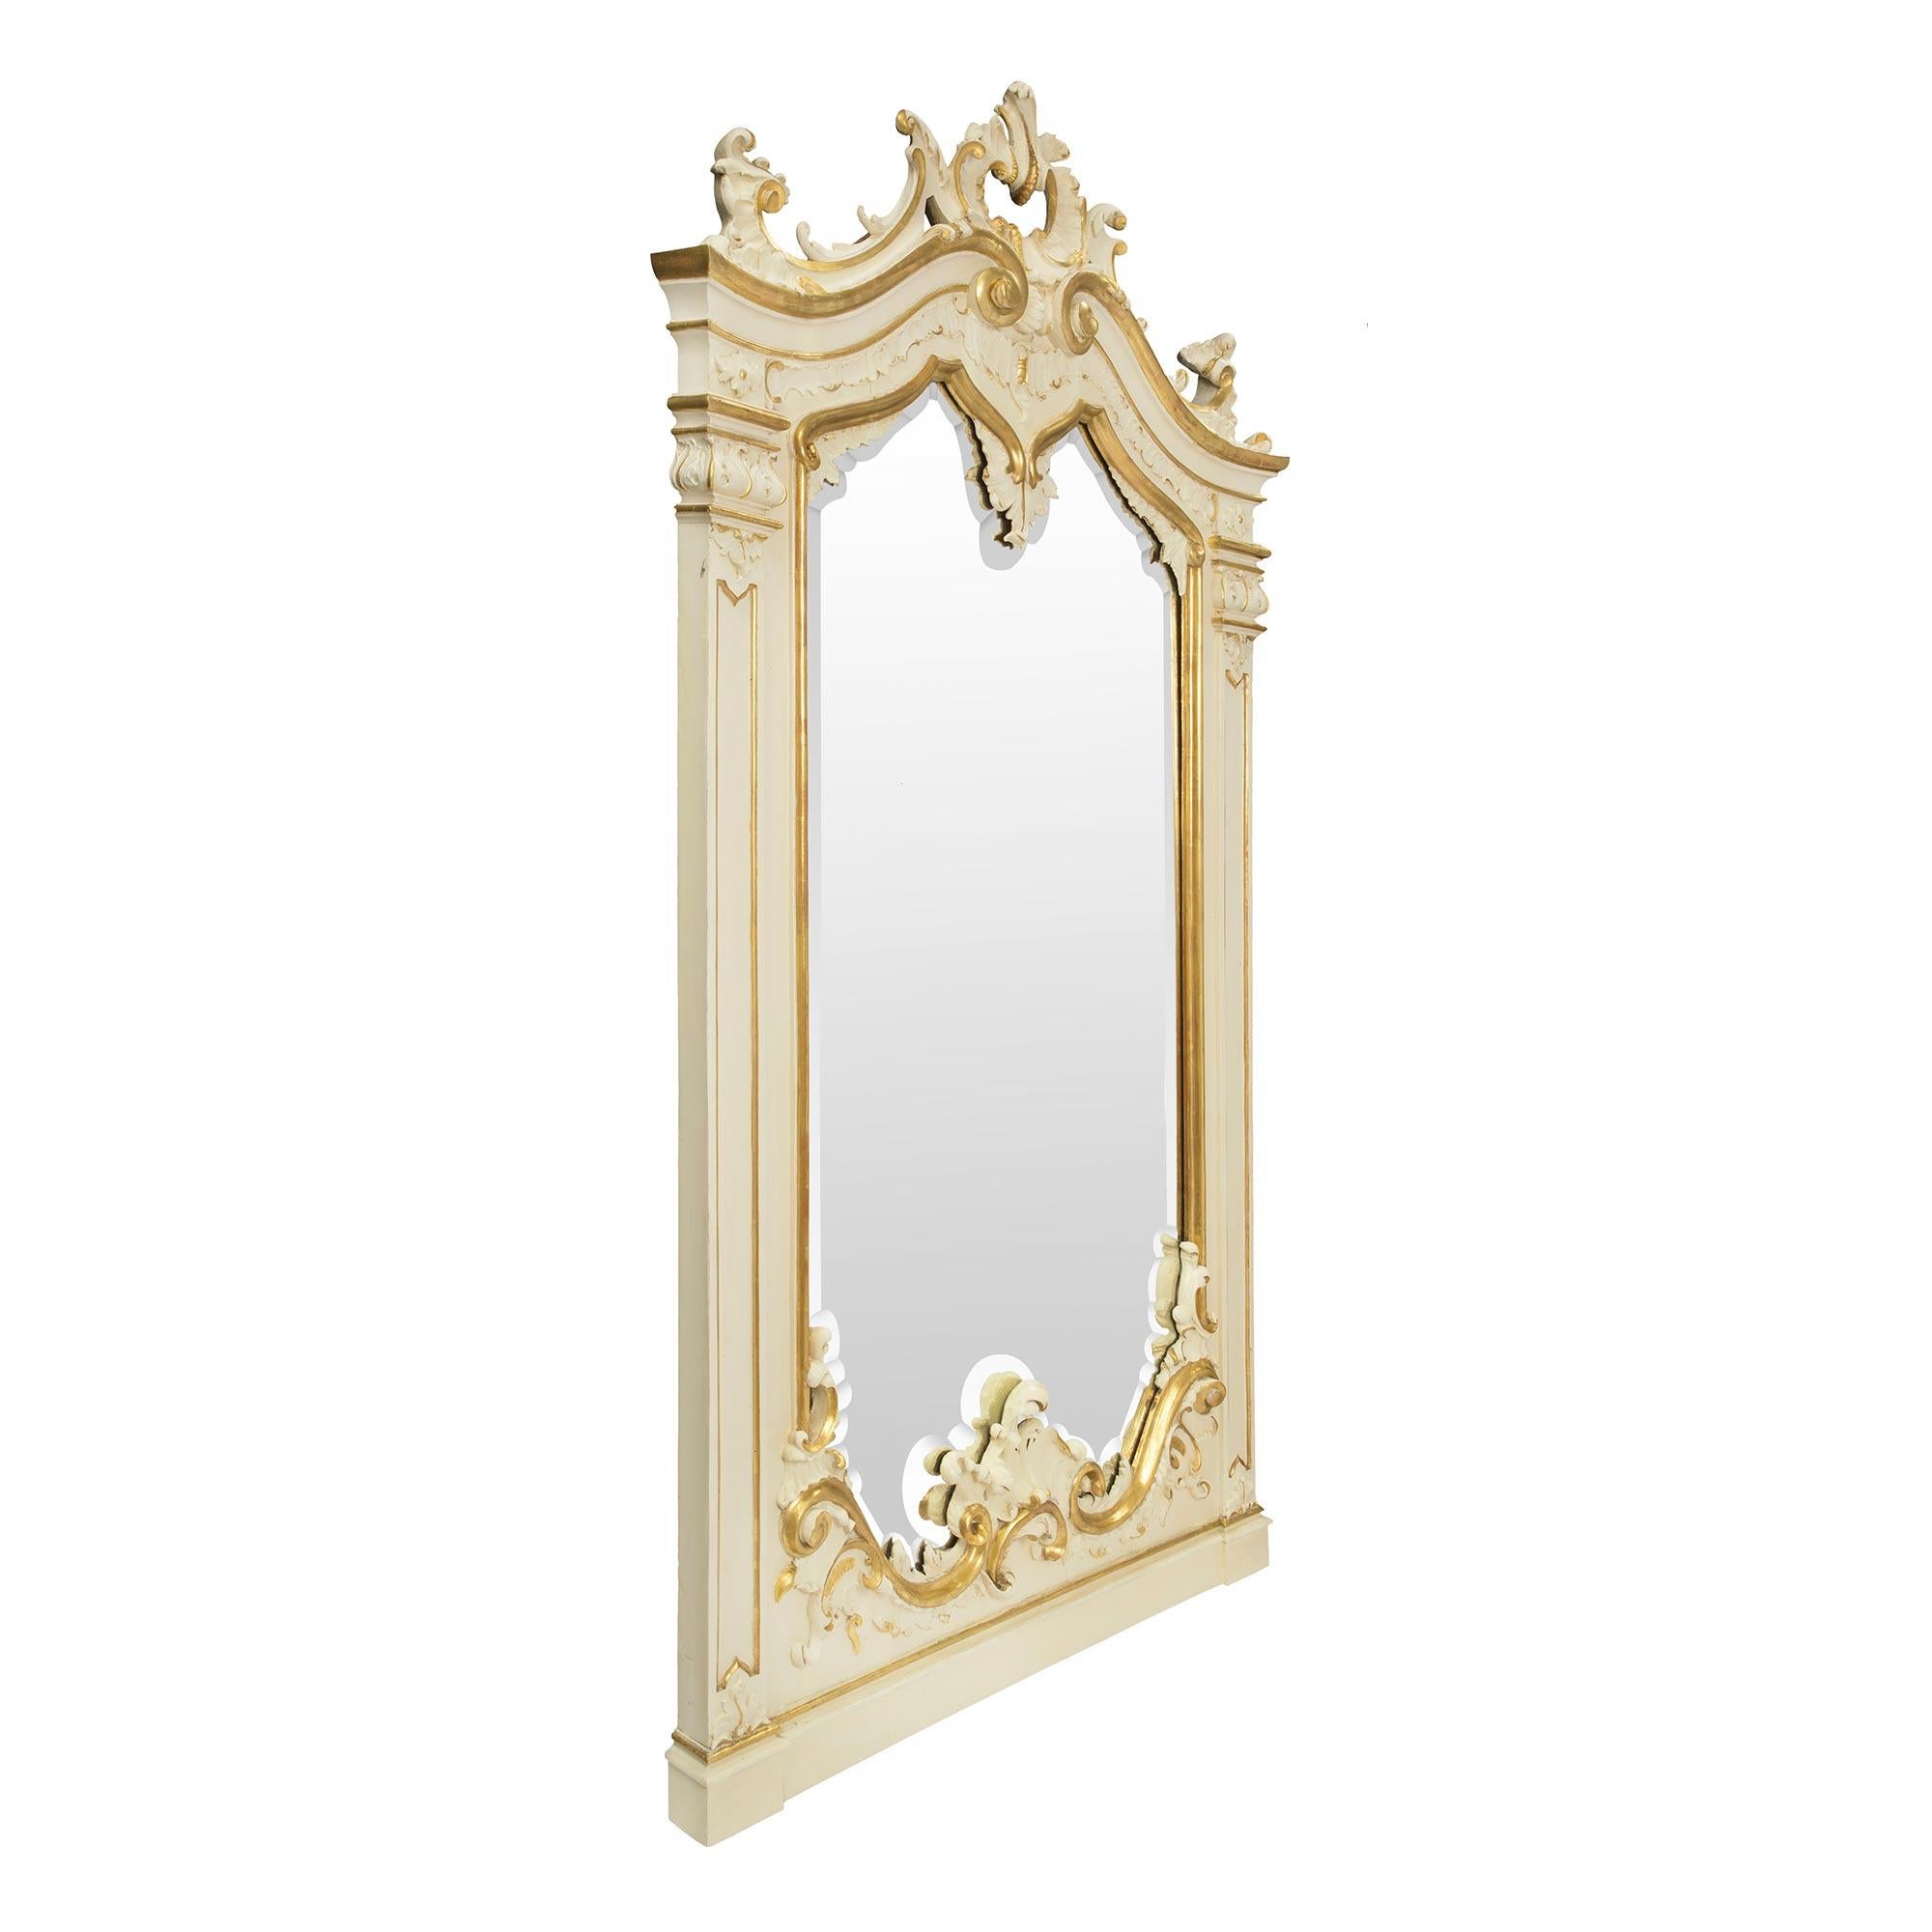 A sensational and unique Italian 19th century patinated and gilt Venetian mirror. The mirror has a bottom mottled band with a most impressive carved foliate spray amidst gilt 'S' and C' scrolls. The two side panels are decorated by recessed mottled